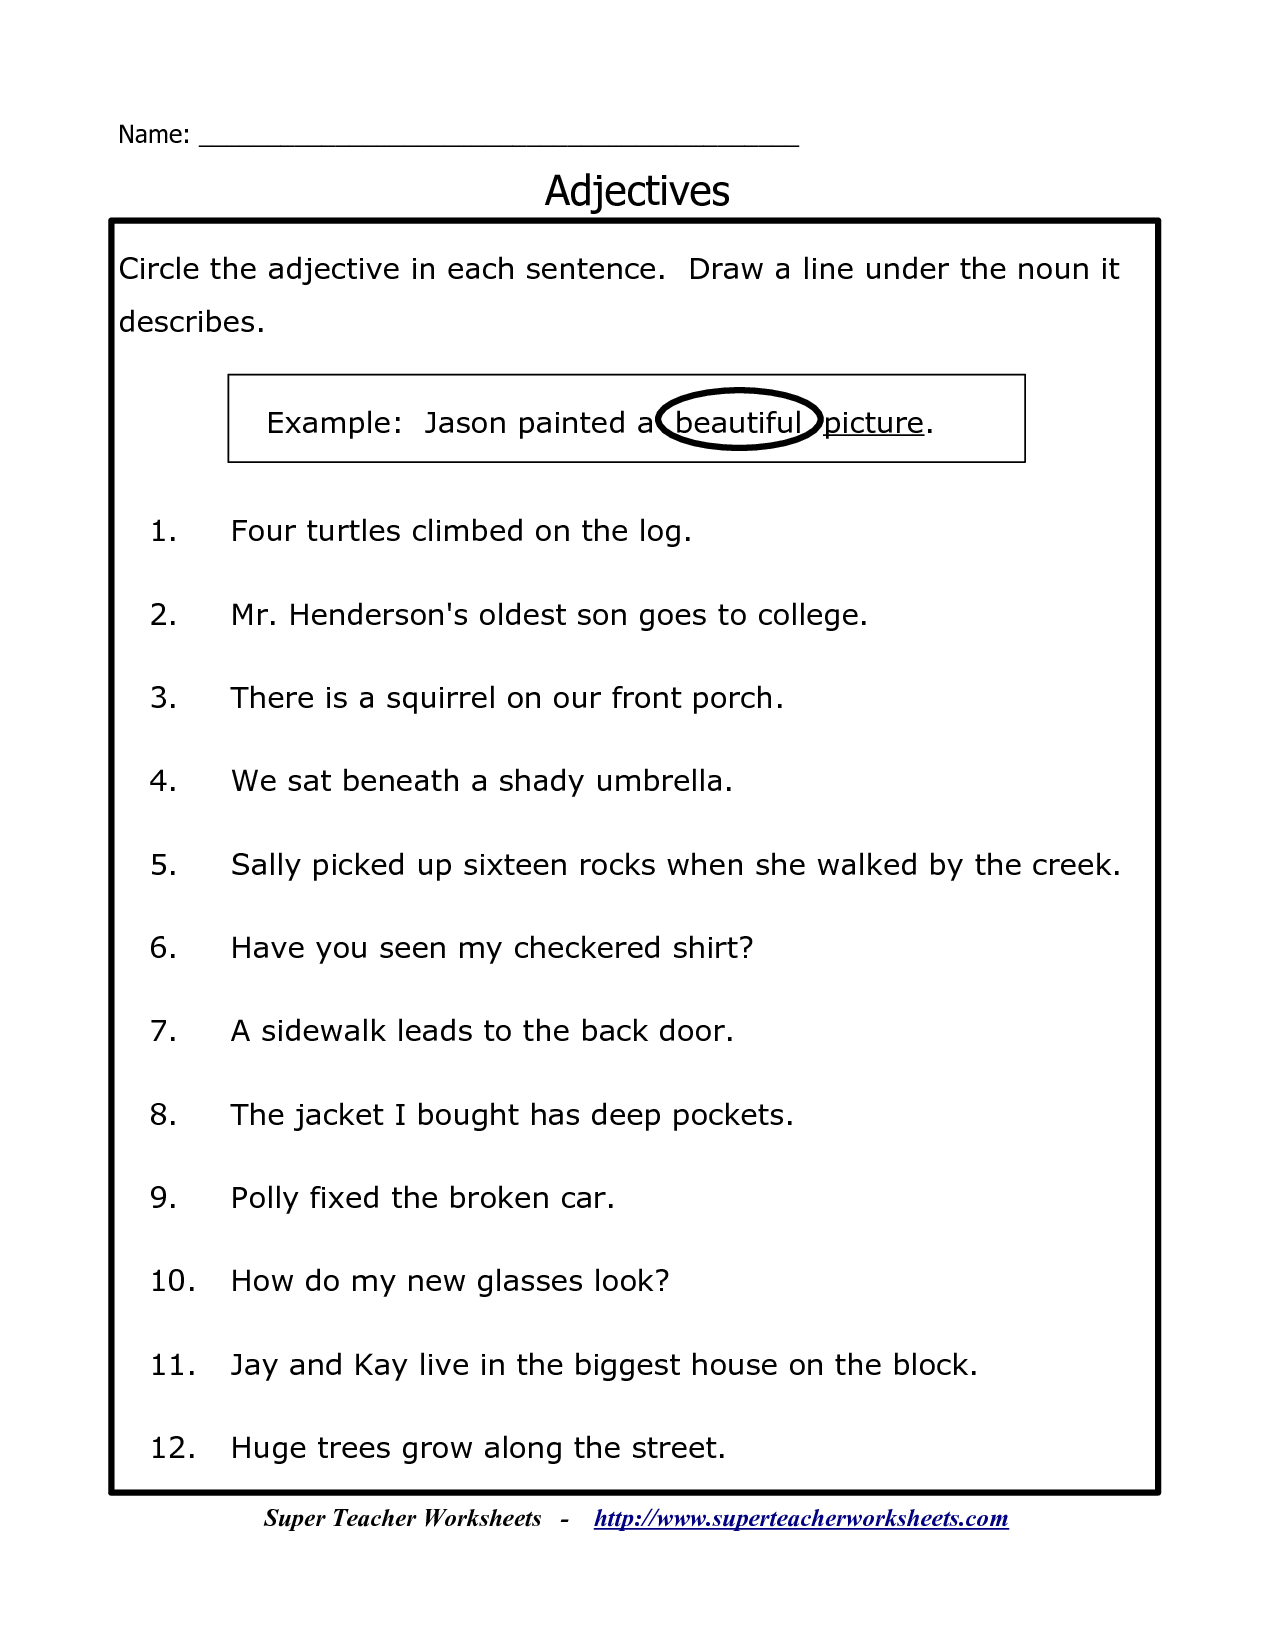 noun-verb-adjective-worksheet-identifying-nouns-verbs-and-adjectives-esl-worksheet-by